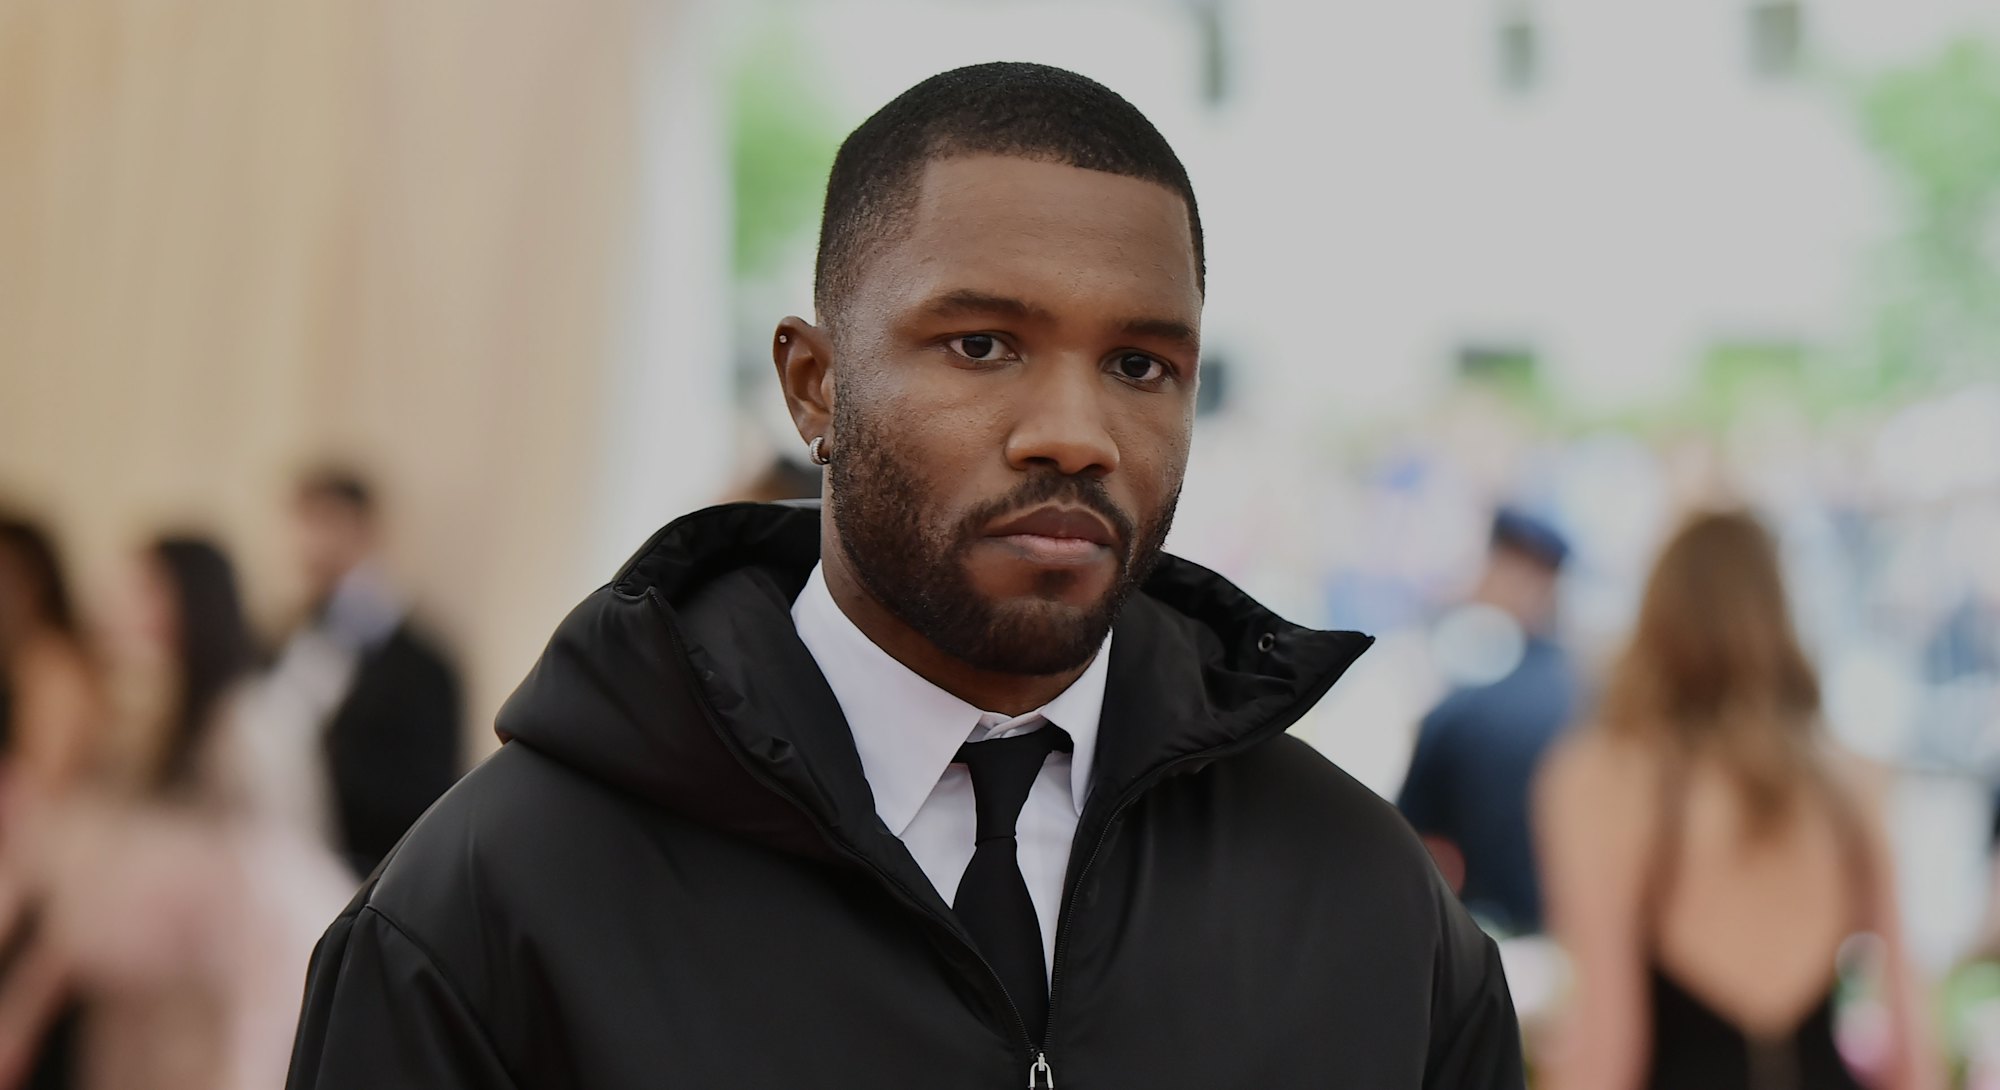 NEW YORK, NEW YORK - MAY 06: Frank Ocean attends The 2019 Met Gala Celebrating Camp: Notes on Fashio...